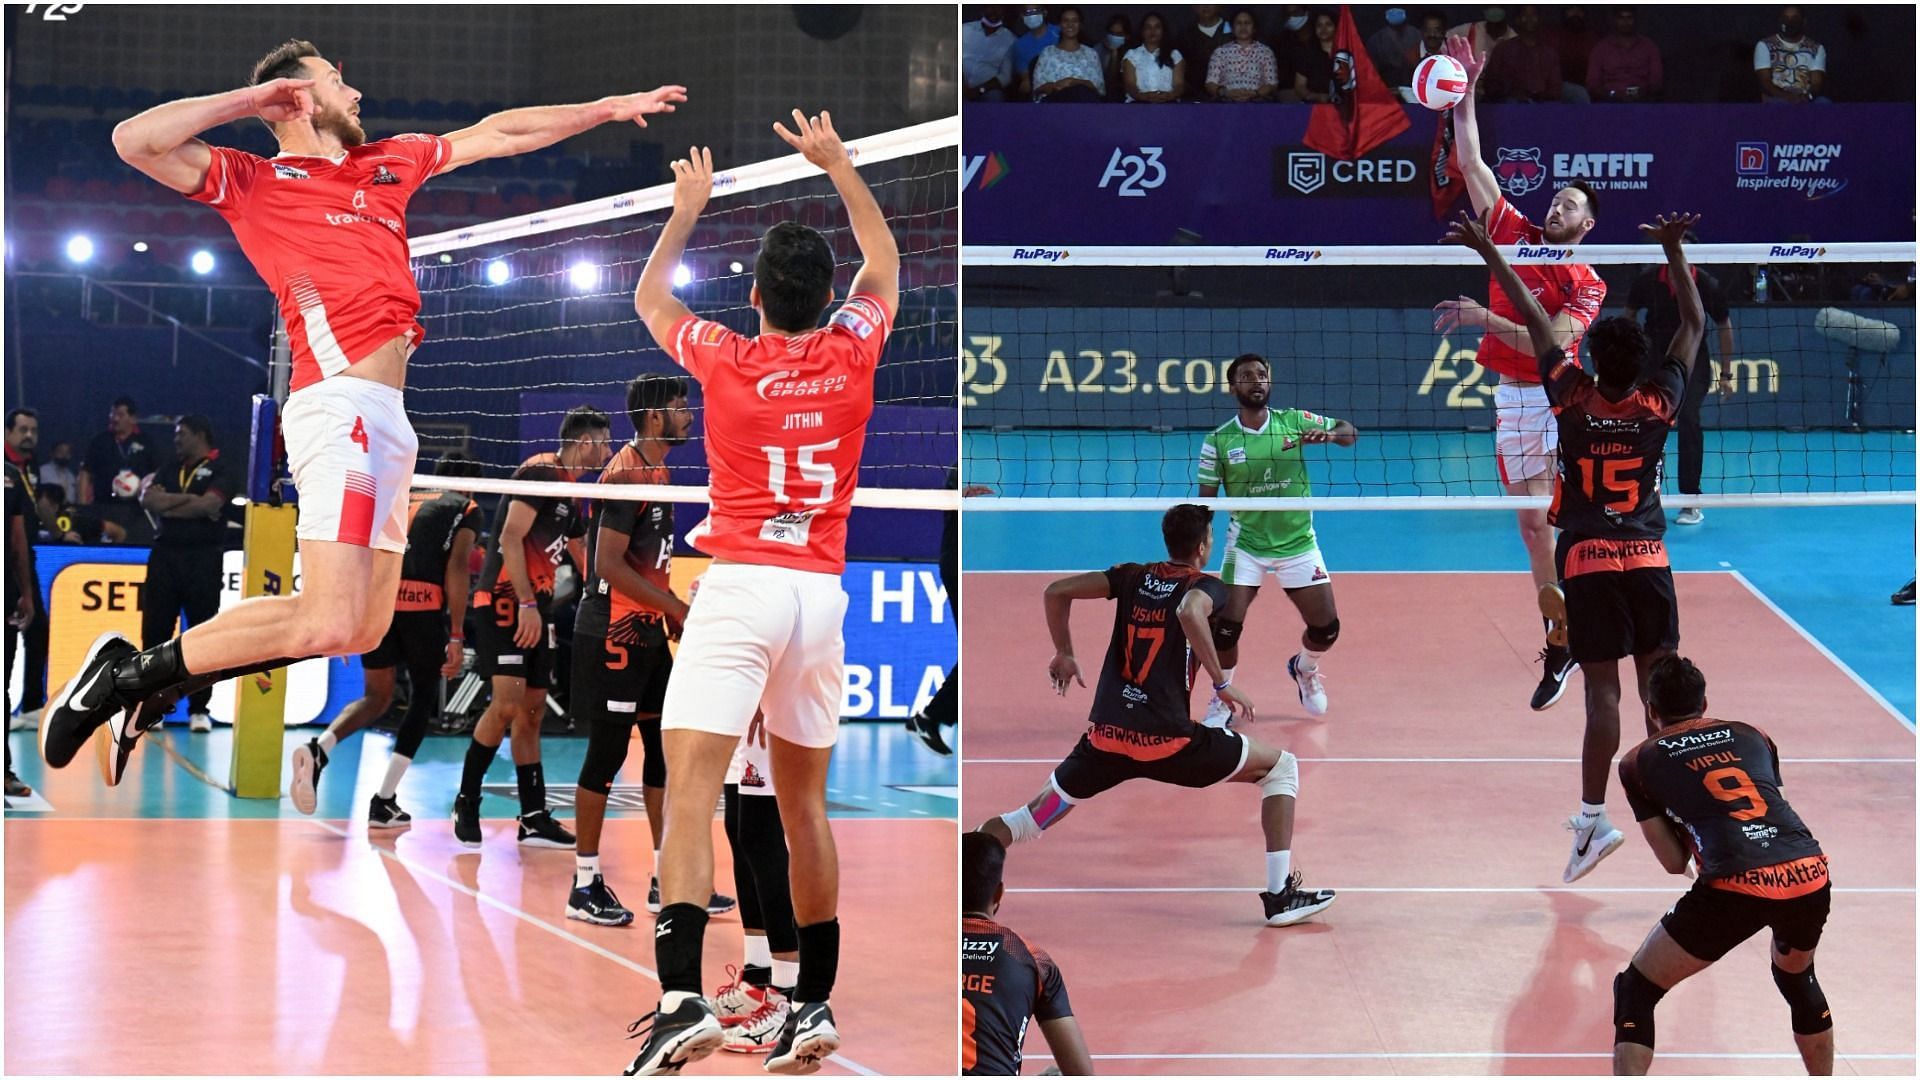 Calicut Heroes&#039; David Lee in action during their match against Black Hawks (Pic Credit: PVL)